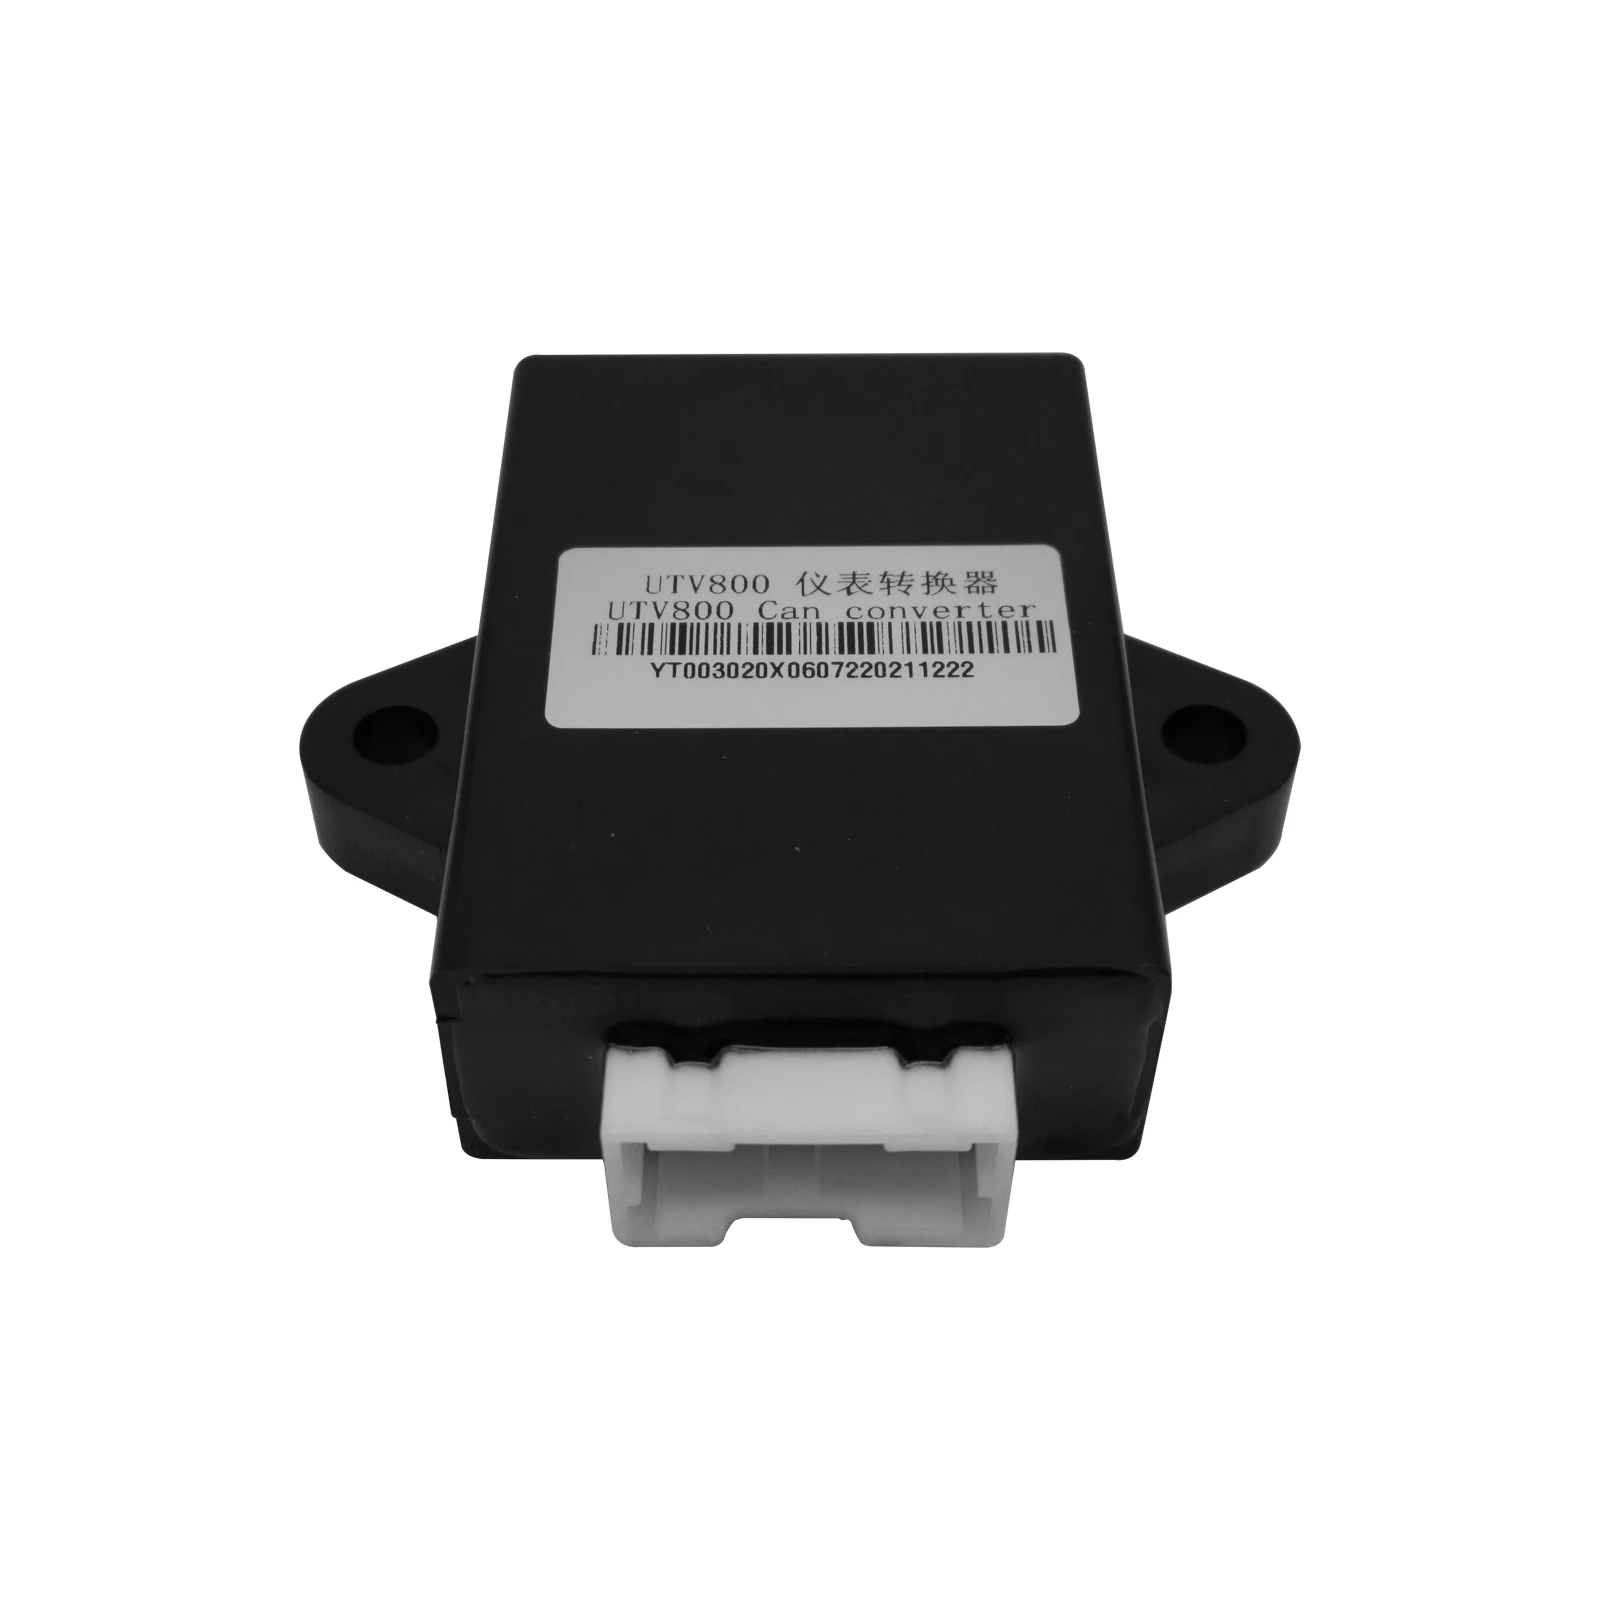 

Controller Relay Switch，Can Converter For ODES UTV 800 Dominator Raider X2 X4 Zeus LT ST Parts Number 15309160220